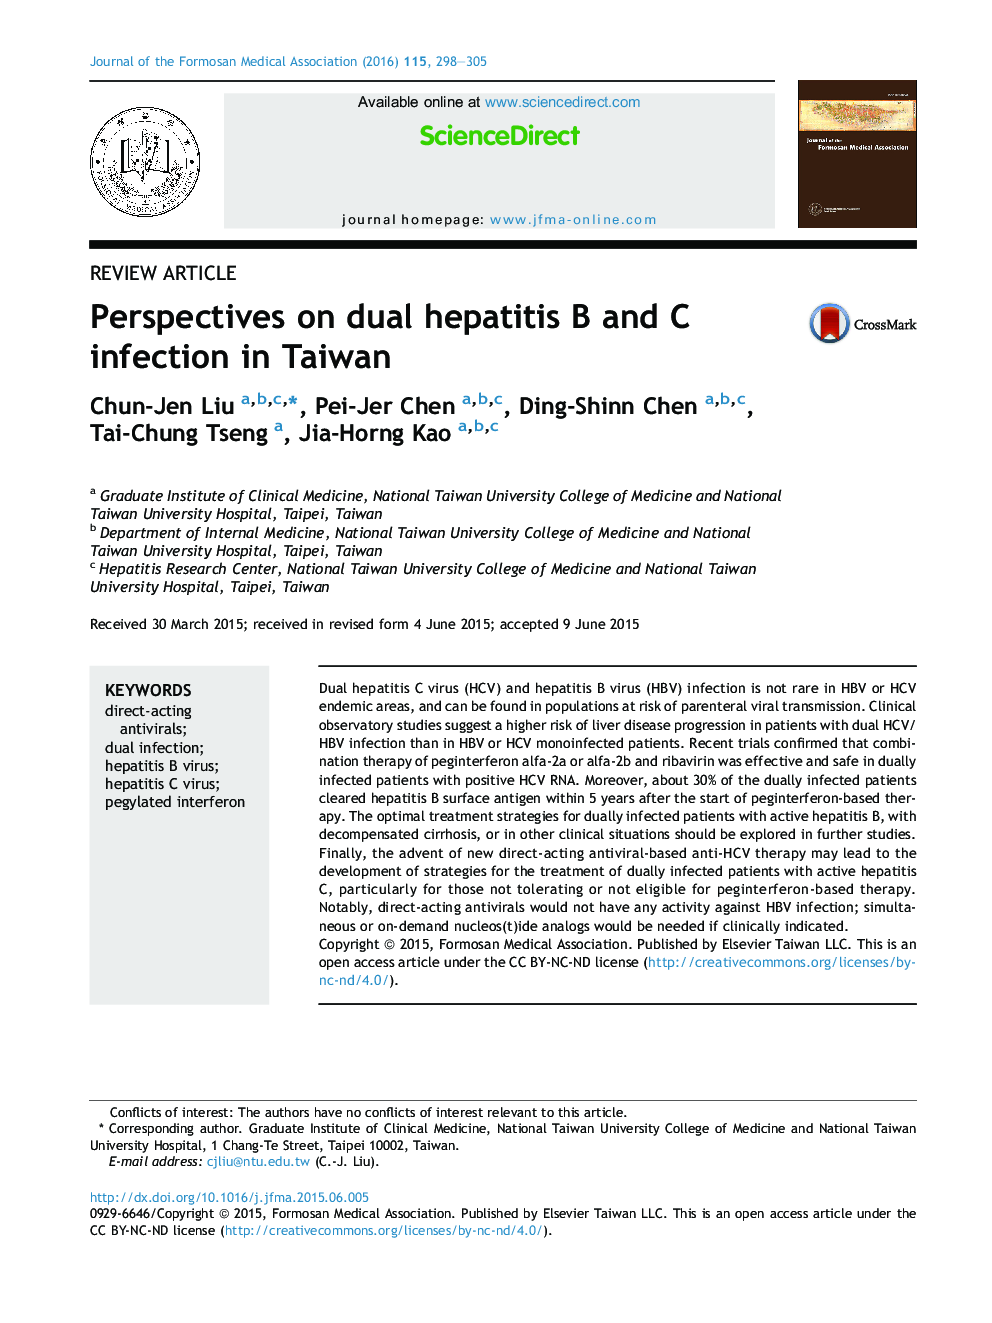 Perspectives on dual hepatitis B and C infection in Taiwan 